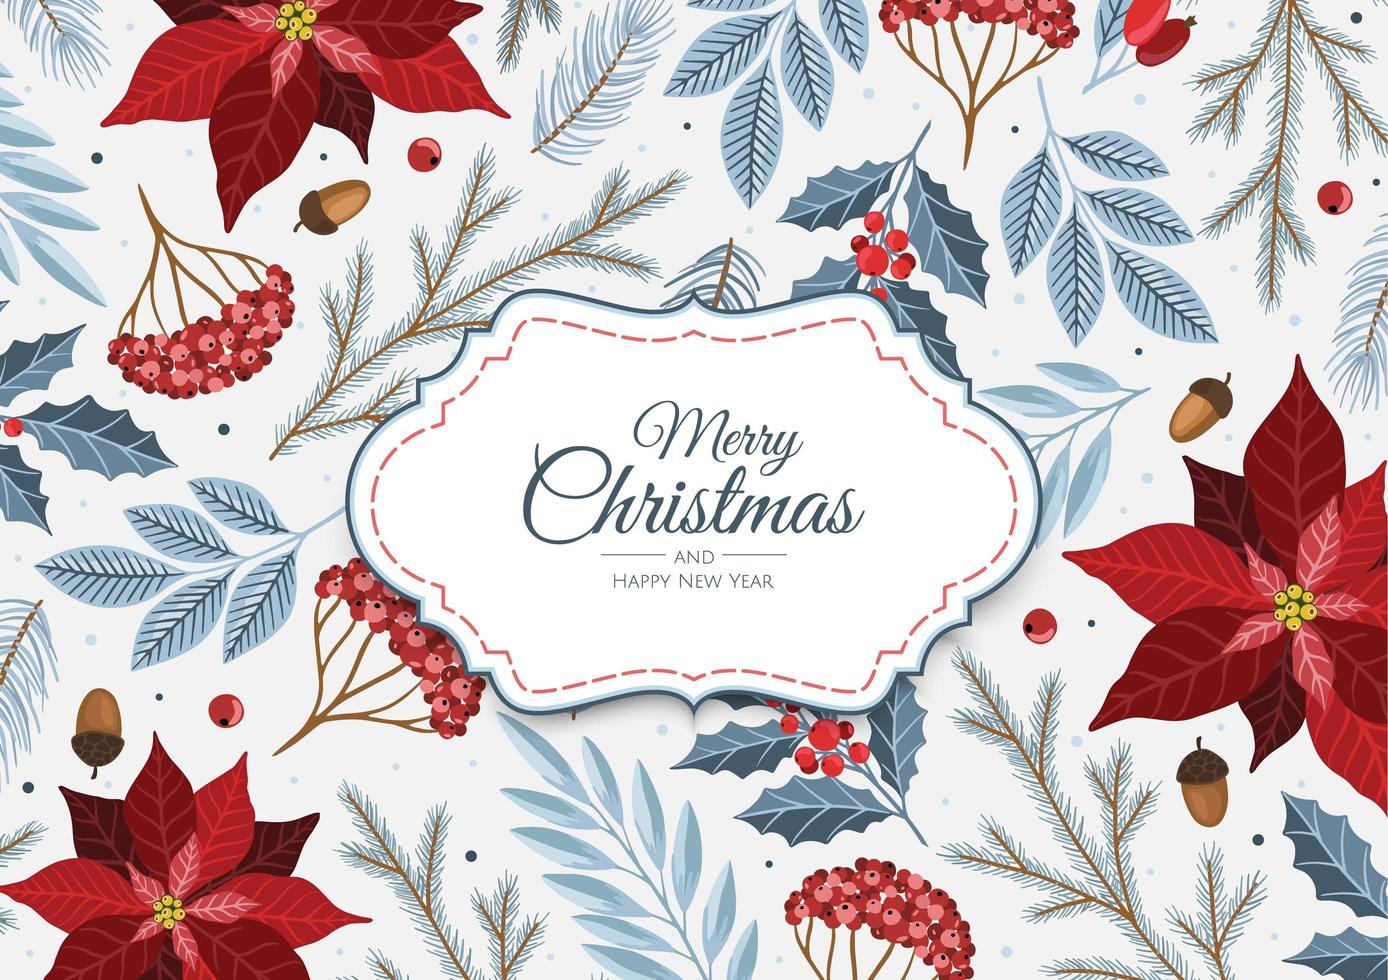 Christmas greeting cards with christmas florals and winter objects vector